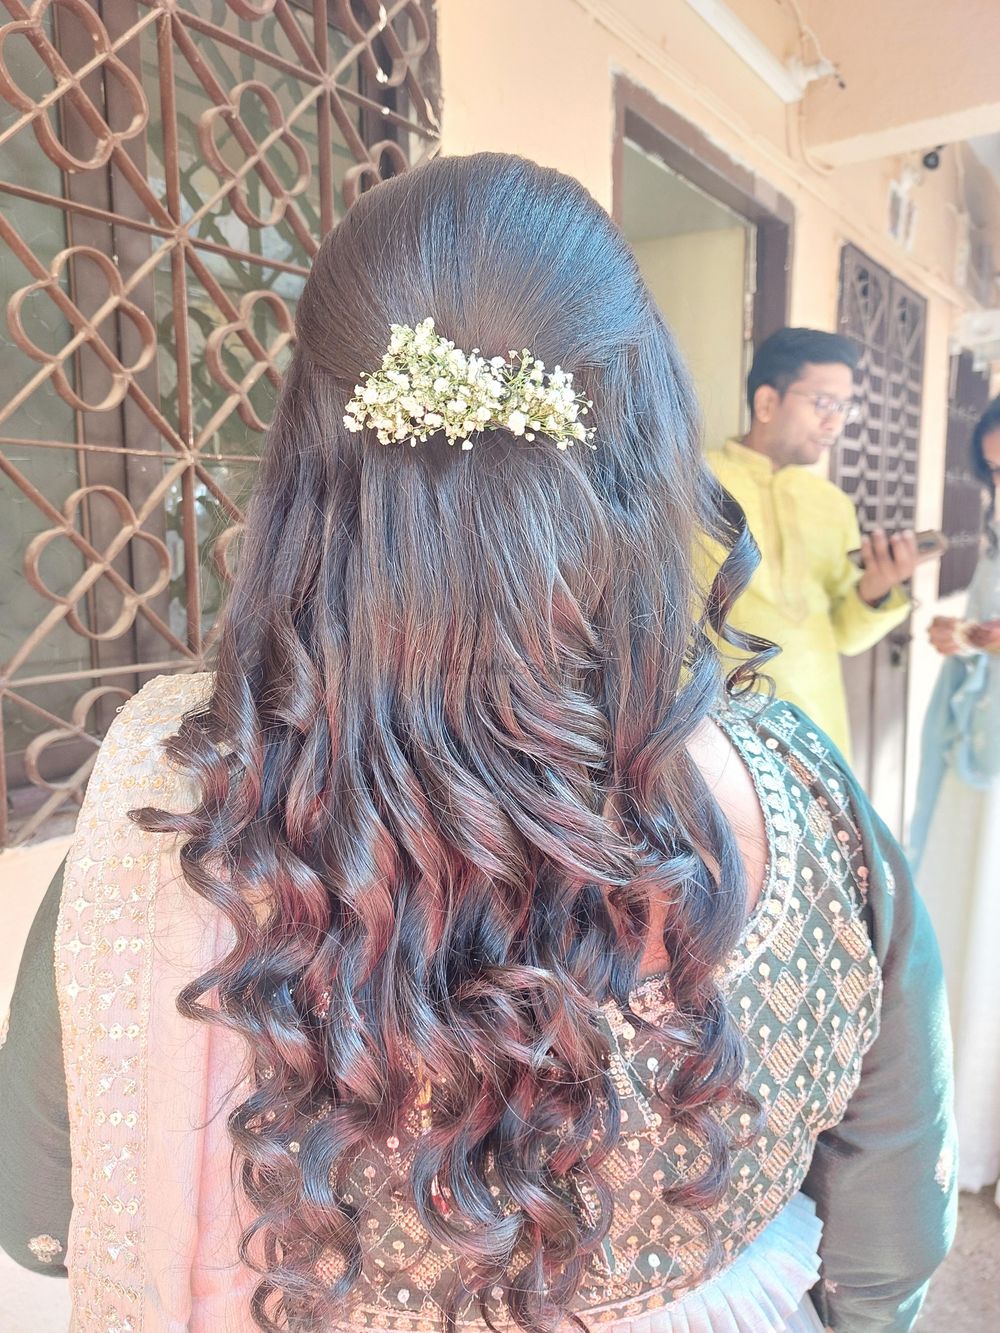 Photo From Hairstyle - By Maitri Chheda Mua